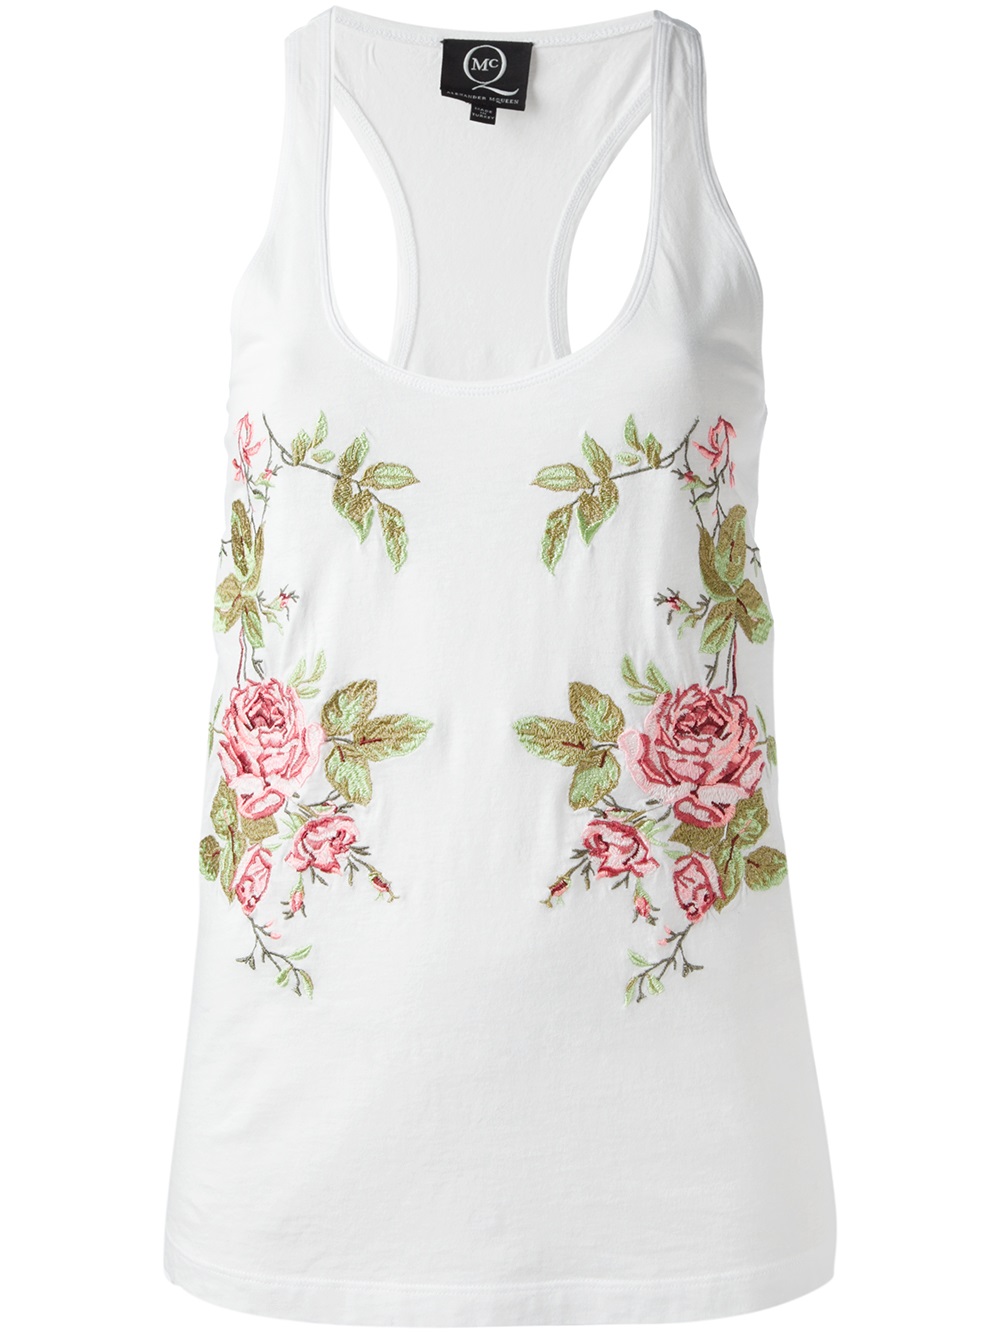 McQ Floral Tank Top in White - Lyst